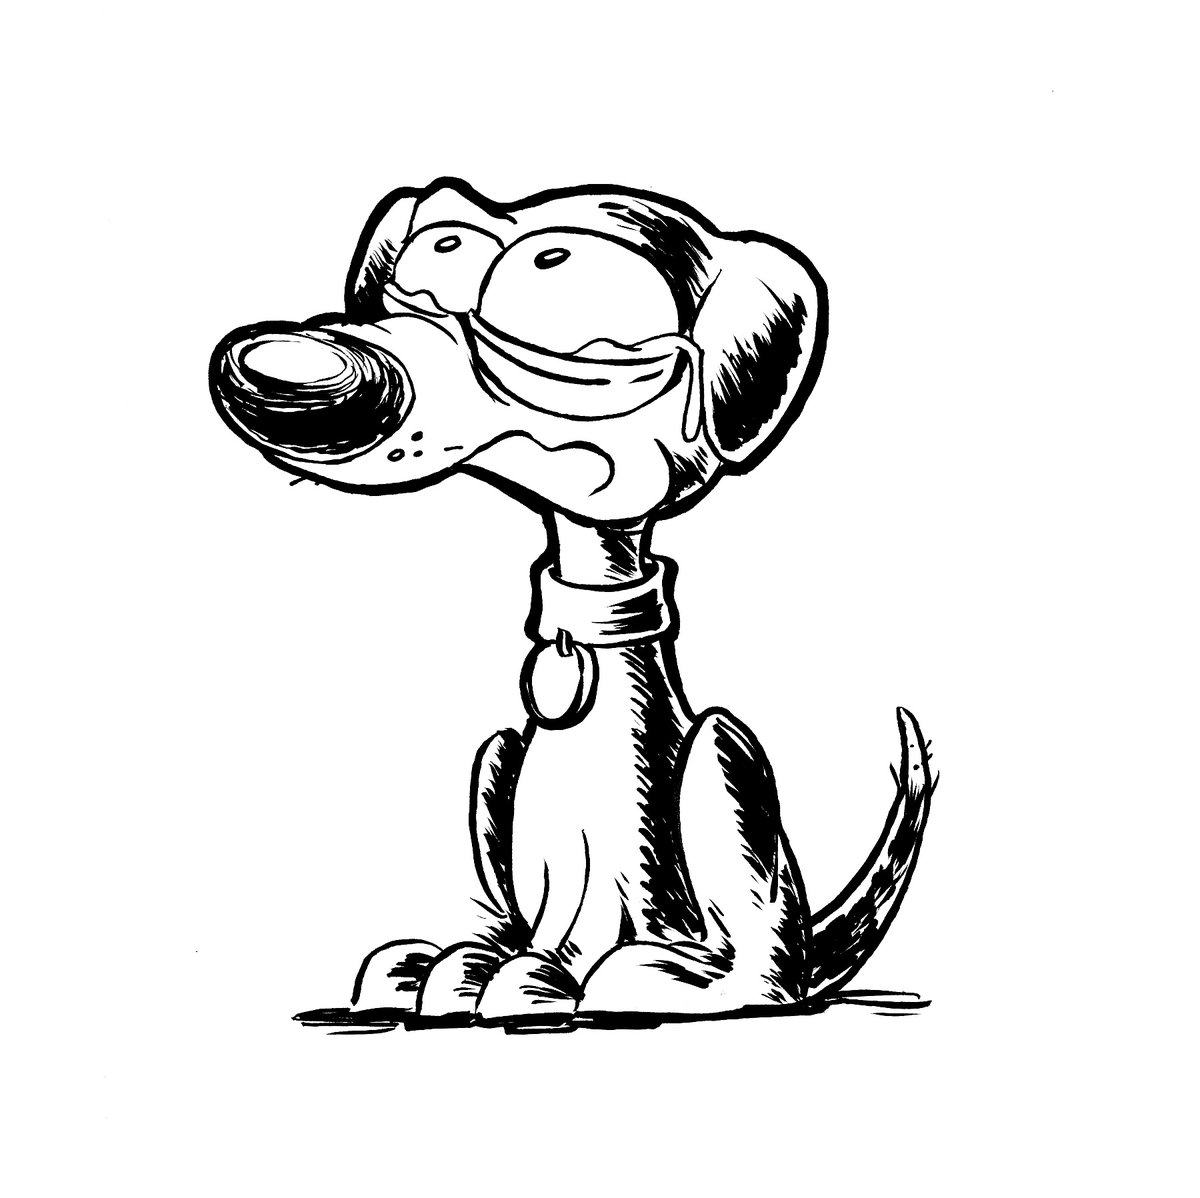 #tears #inktober52 prompt 14
If your dog is sad…so are you! 
Hope you’re not sad…
This little guy was inked with a #pentelbrushpen 

#inktober #drawingprompt  #inktober52tears #sketchoftheday #dog #dogs #doggies #doglovers 
@inktober @PentelofAmerica